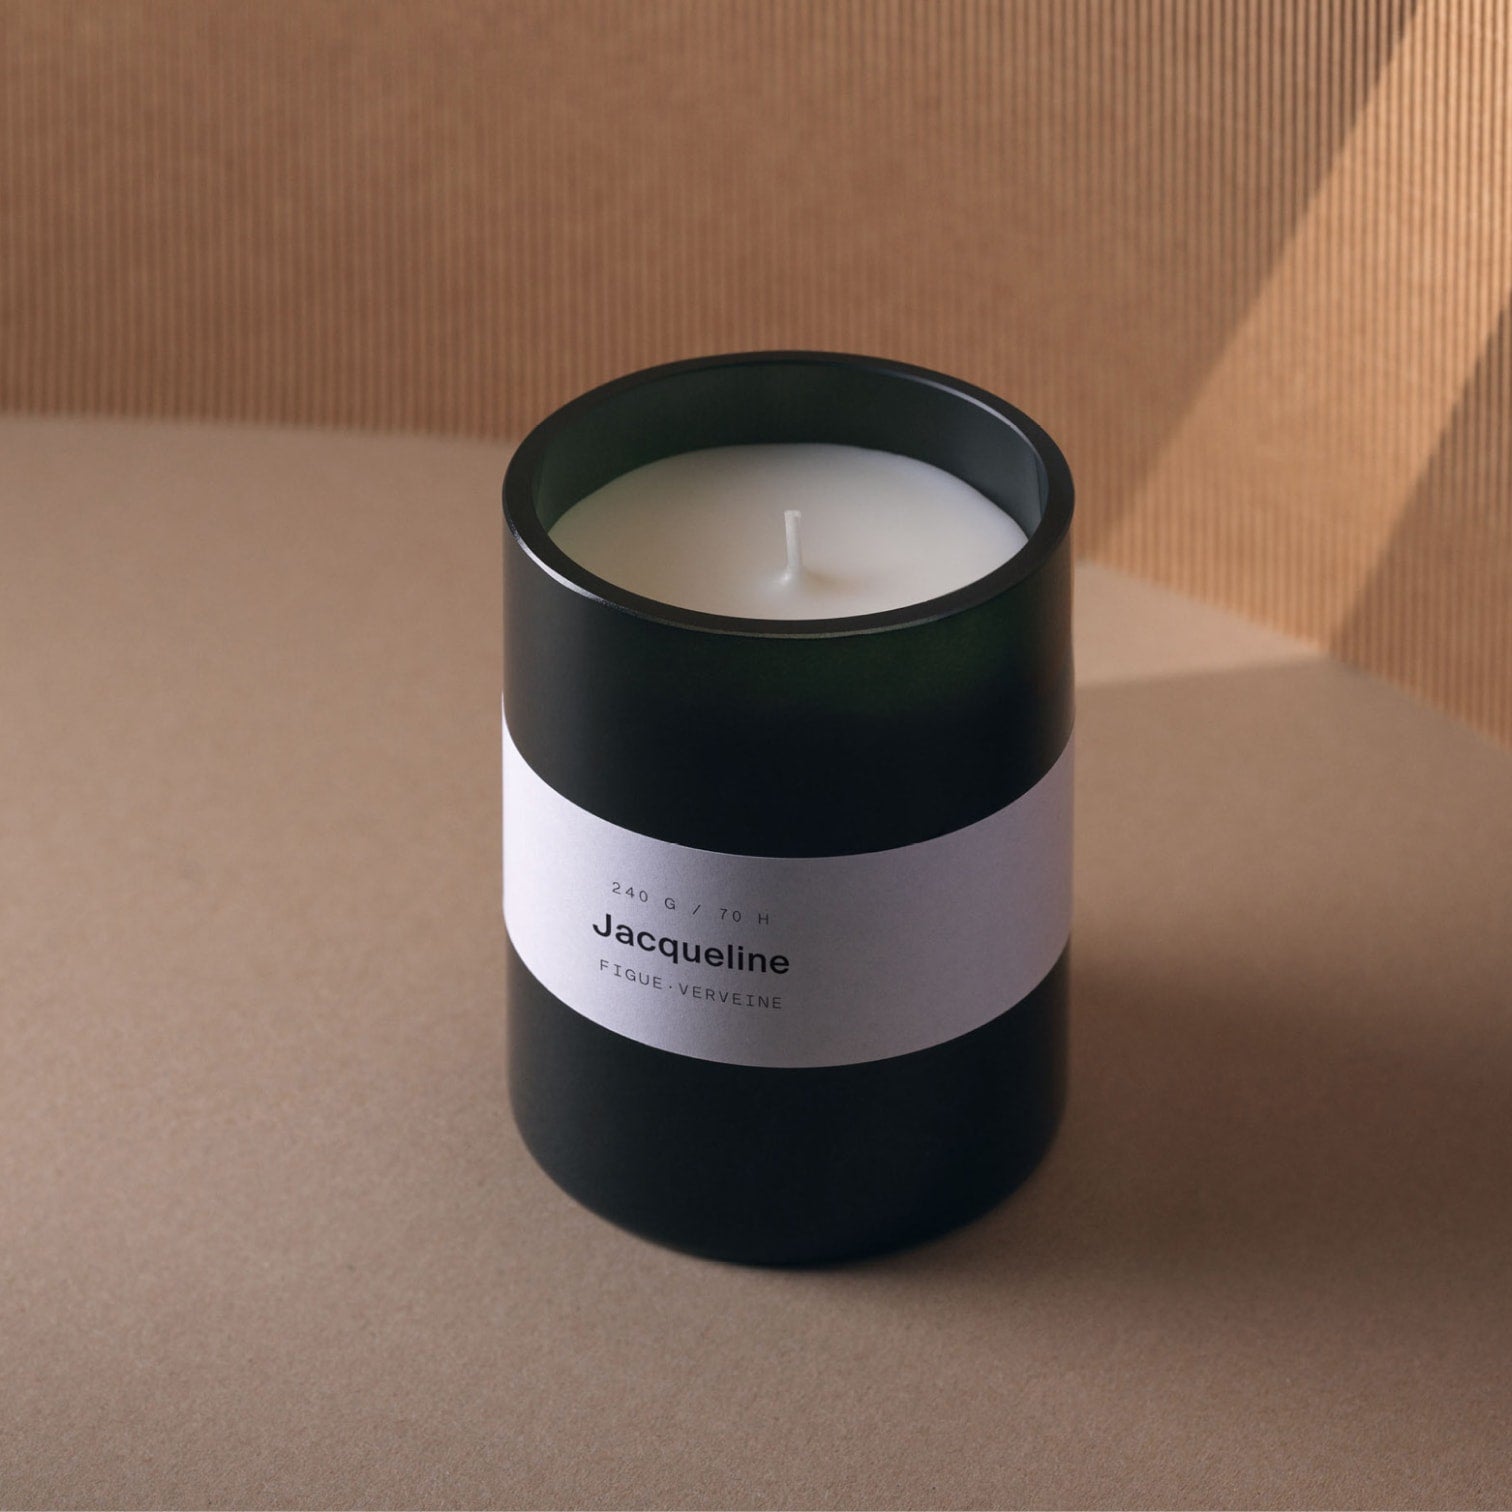 MarieJeanne Jacqueline Scented Candle